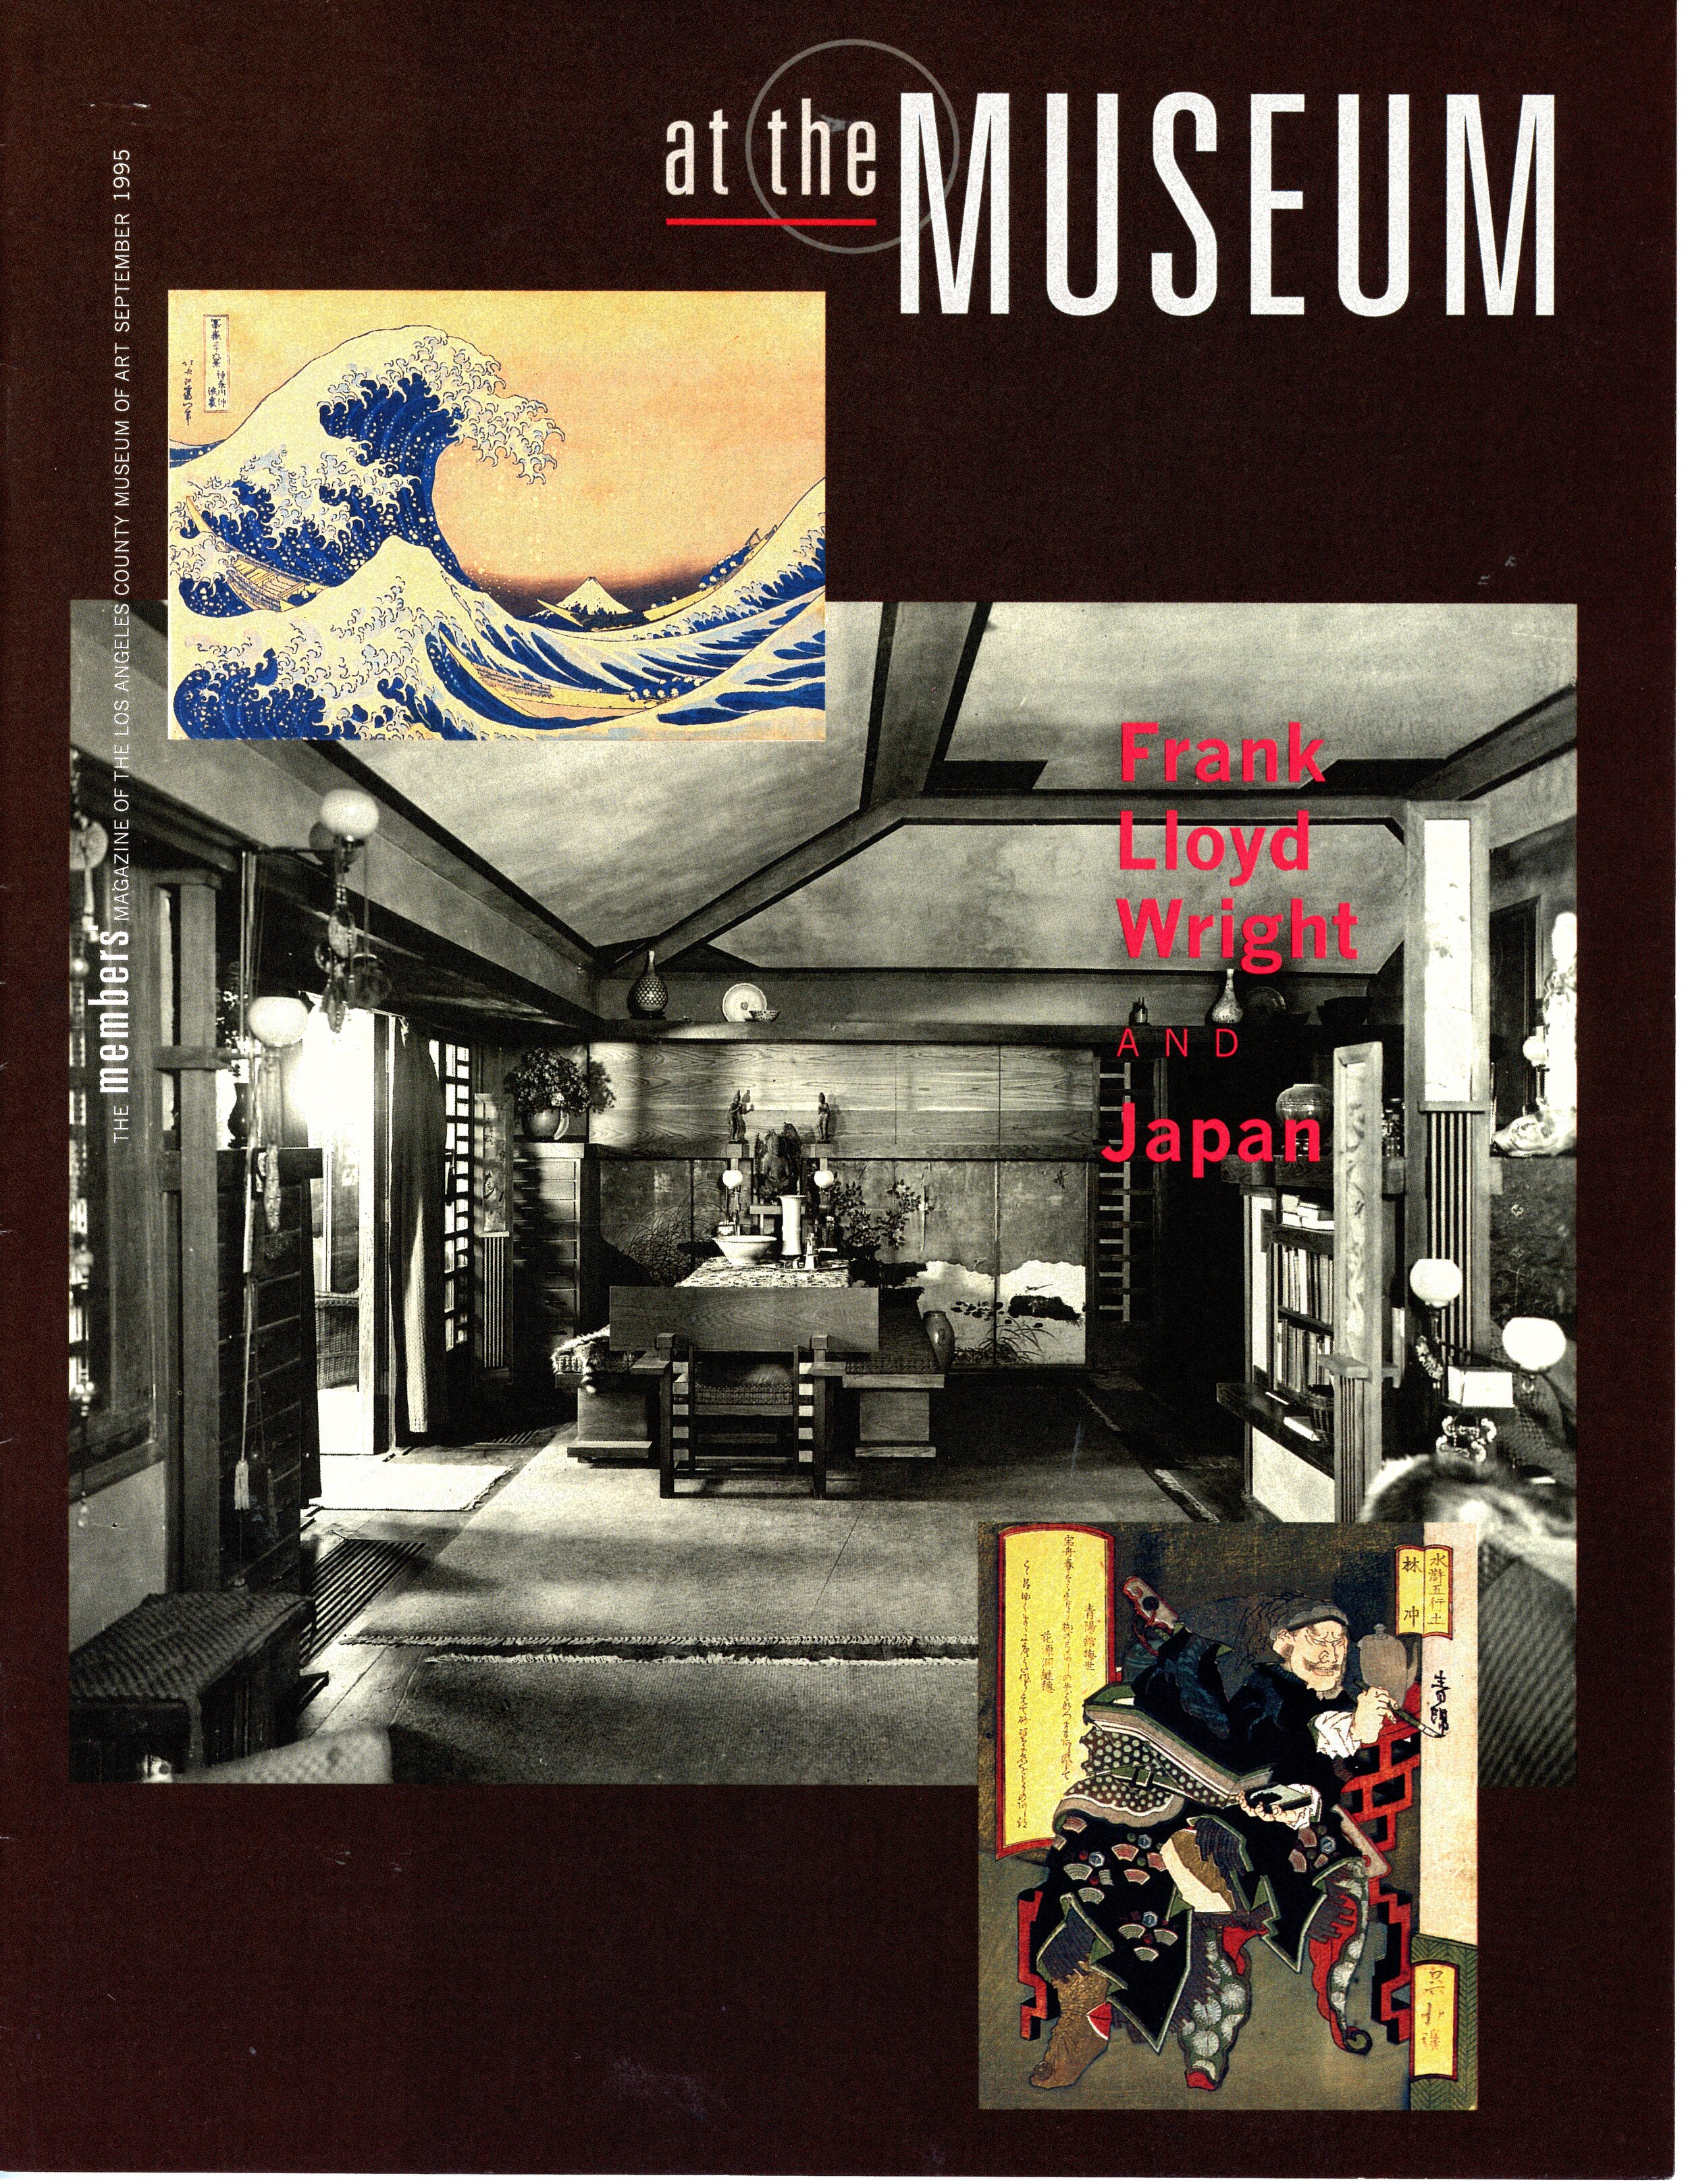 At the Museum - FLW and Japan